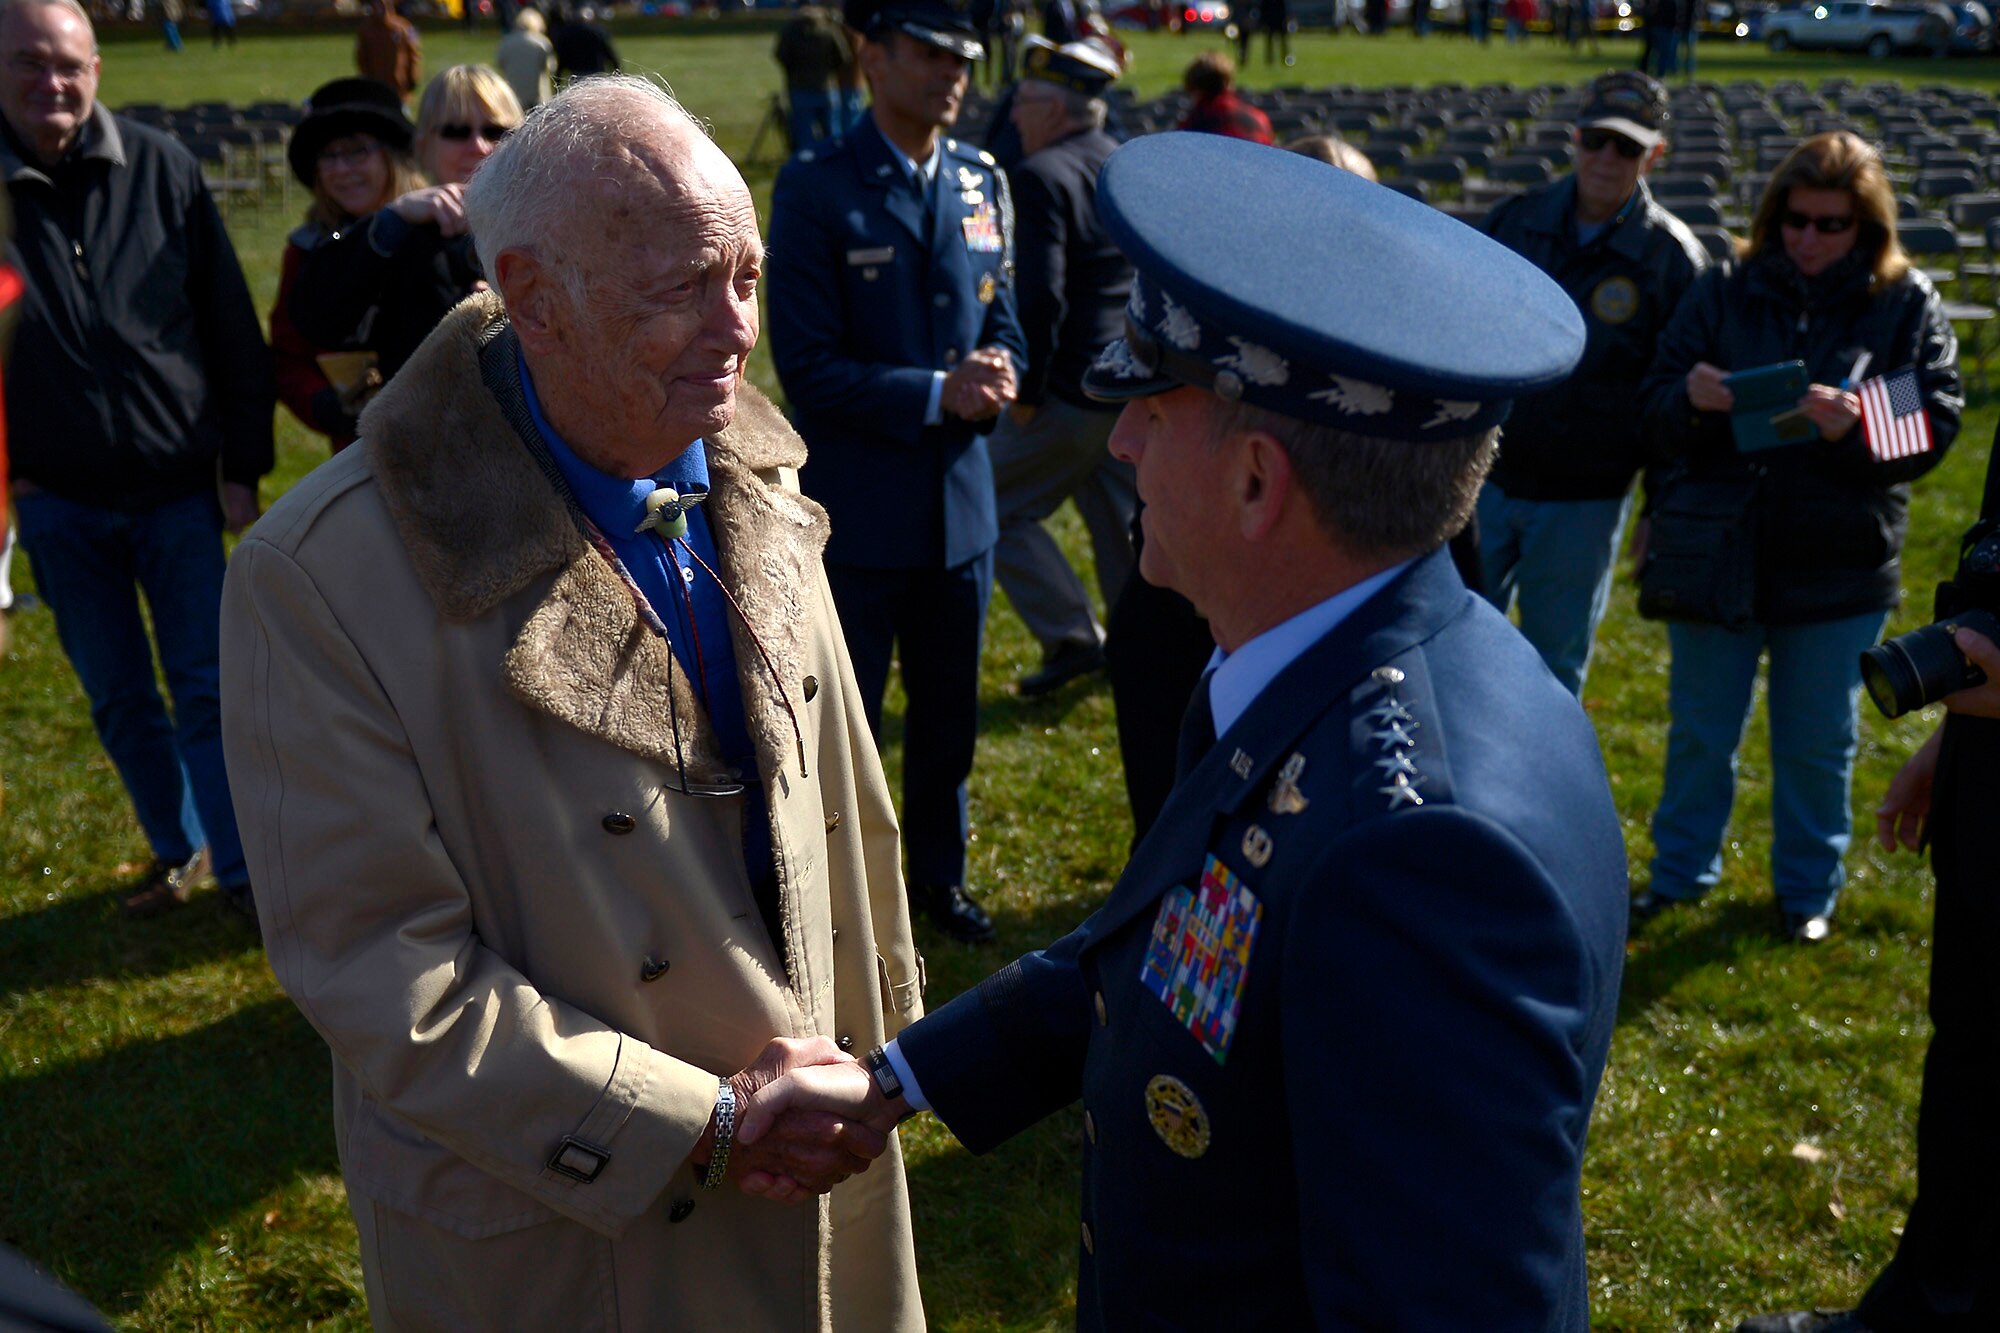 Air Force Chief of Staff Gen. David L. Goldfein shakes hands with (Ret) Col. Eugene Deatrick after a Veterans Day ceremony at Quantico National Cemetery in Quantico, Va., Nov. 11, 2017. The Veterans Day ceremony is an annual event hosted by the Potomac Region Veterans Council. The event featured a performance by the Quantico Marine Corps Band. (U.S. Air Force photo by Tech. Sgt. Dan DeCook)